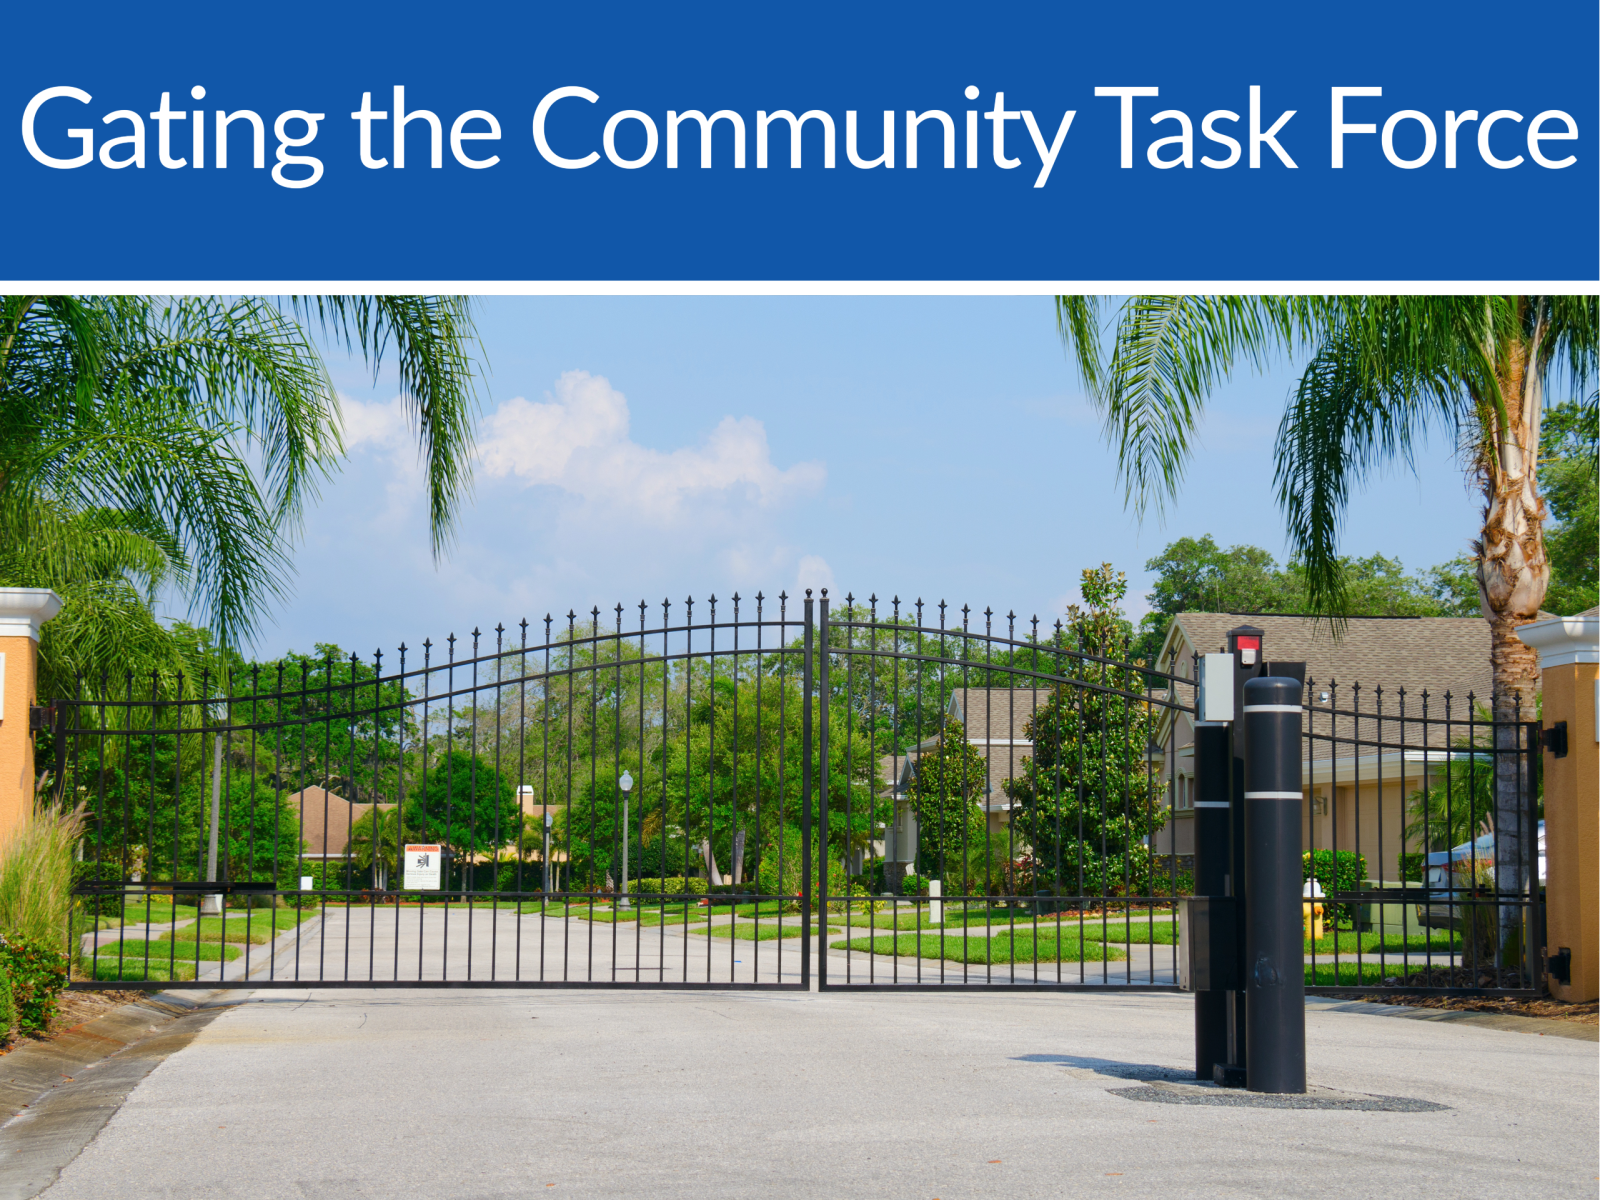 Gating the Community Task Force